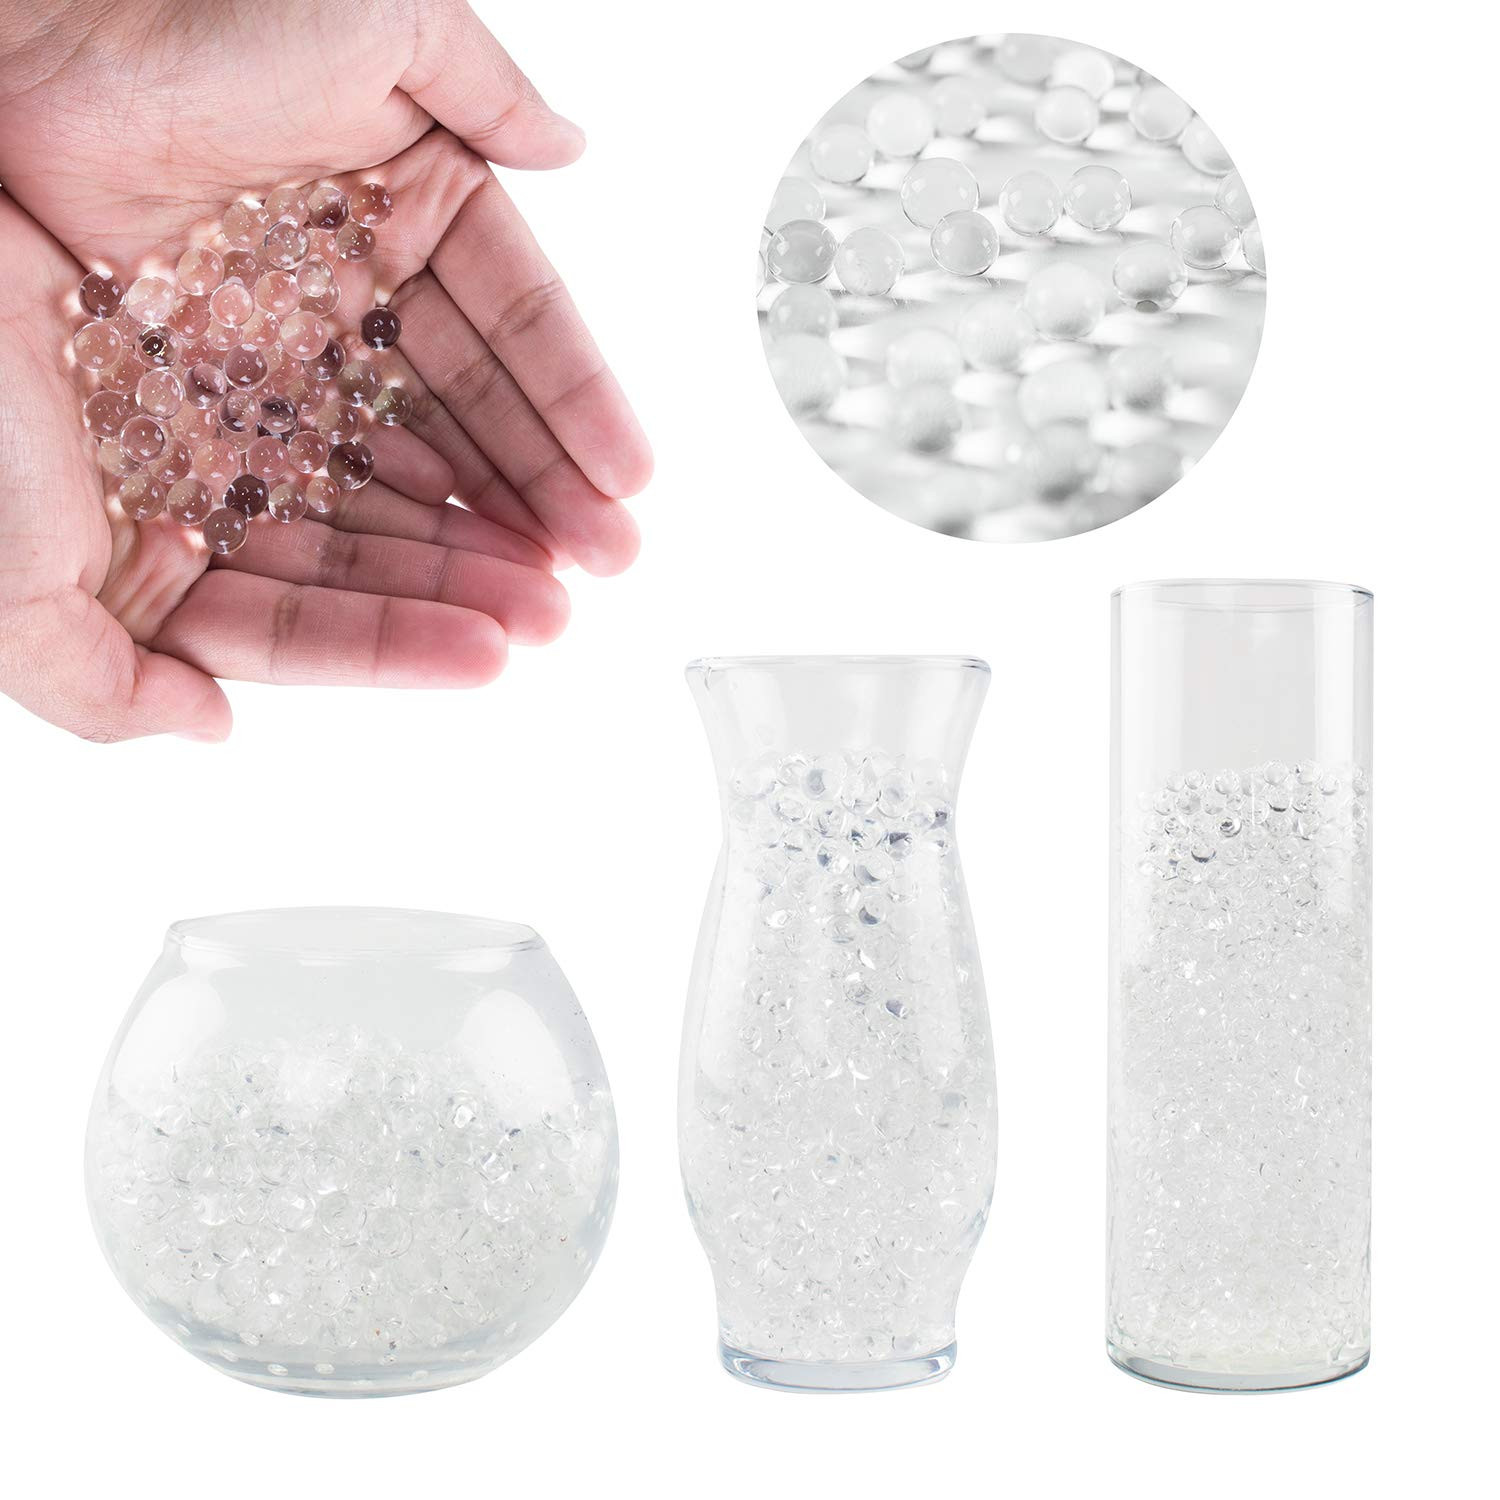 clear plastic beads for vases of best floating pearls for centerpieces amazon com intended for super z outlet 1 pound bag of clear water gel beads pearls for vase filler candles wedding centerpiece home decoration plants toys education